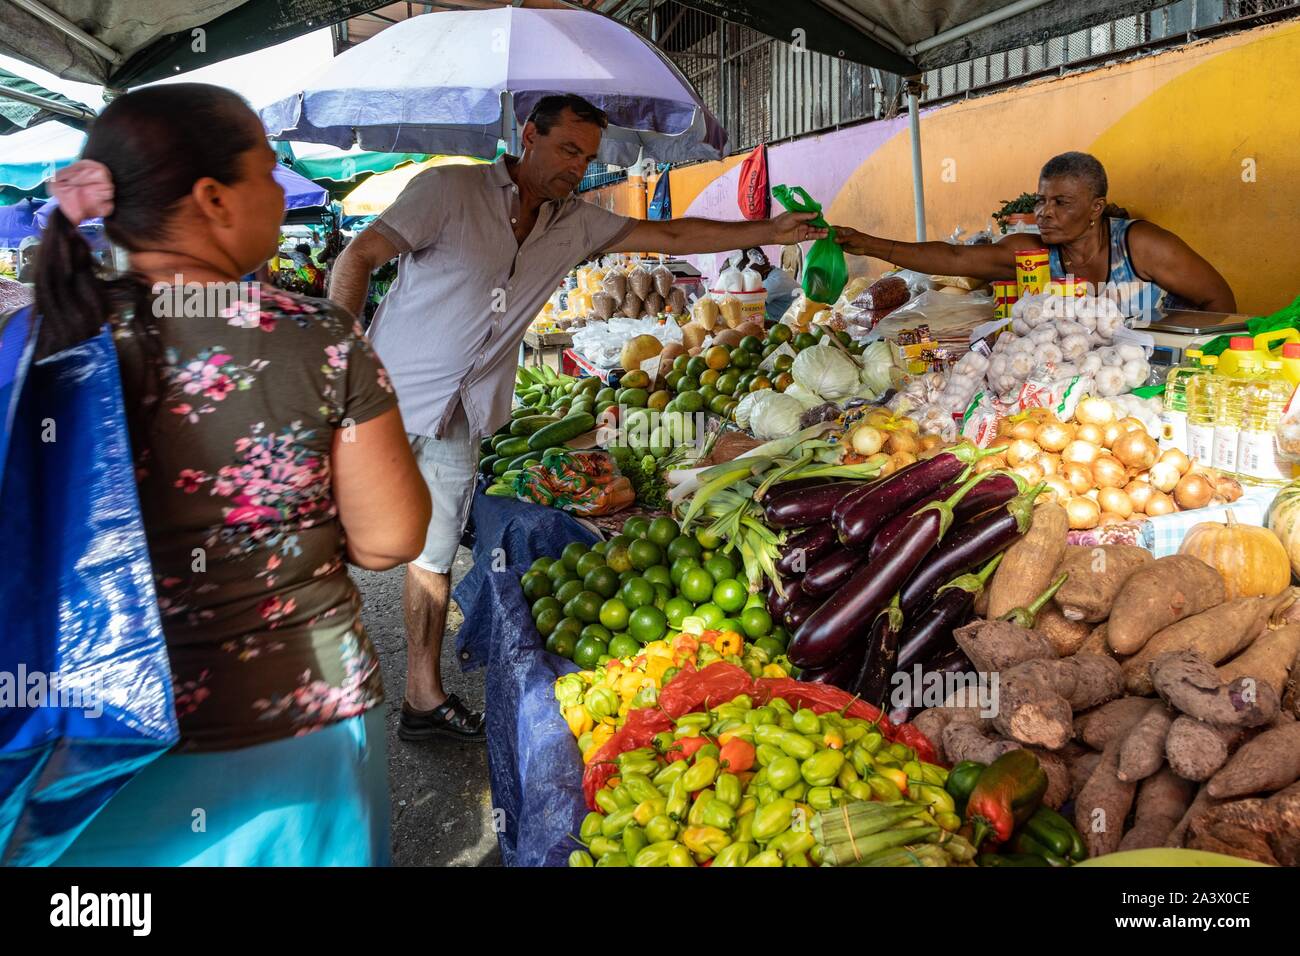 FRUIT AND VEGETABLE STALL, HMONG VENDOR IN THE MARKET OF CAYENNE, FRENCH GUIANA, OVERSEAS DEPARTMENT, SOUTH AMERICA, FRANCE Stock Photo